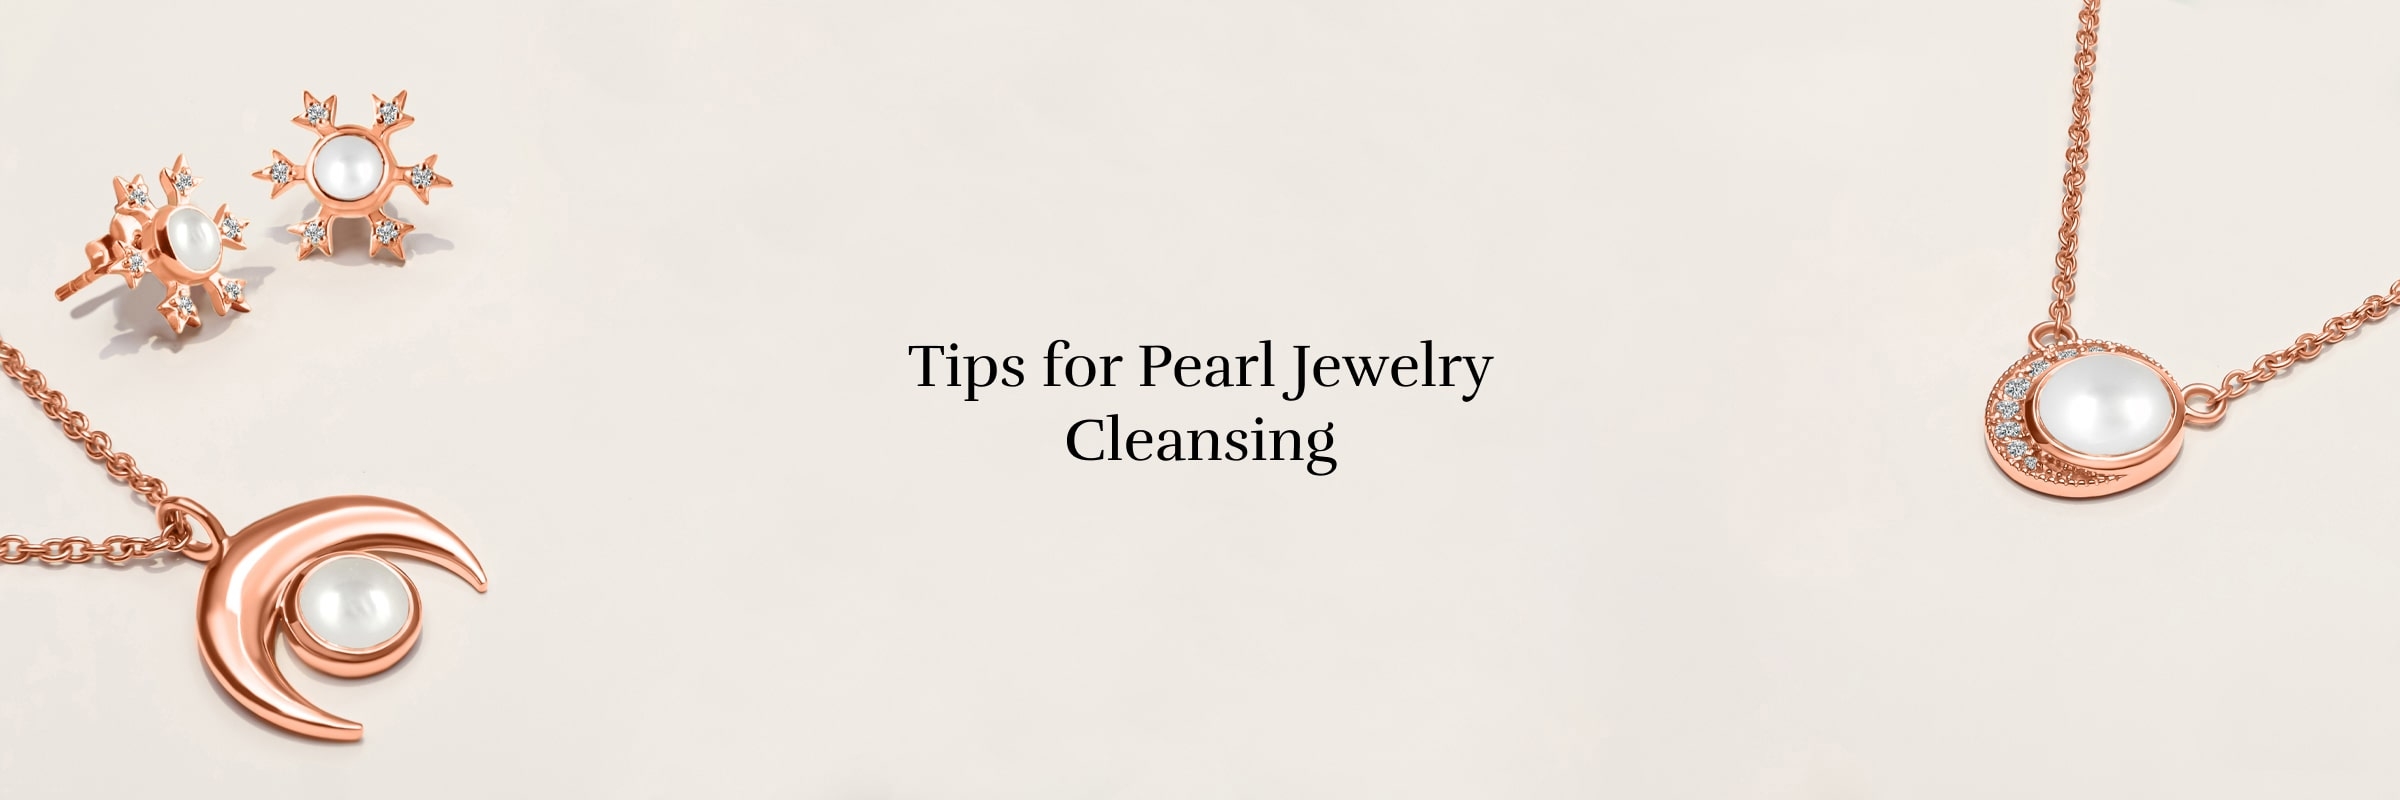 How to Cleanse Your Pearl Jewelry?